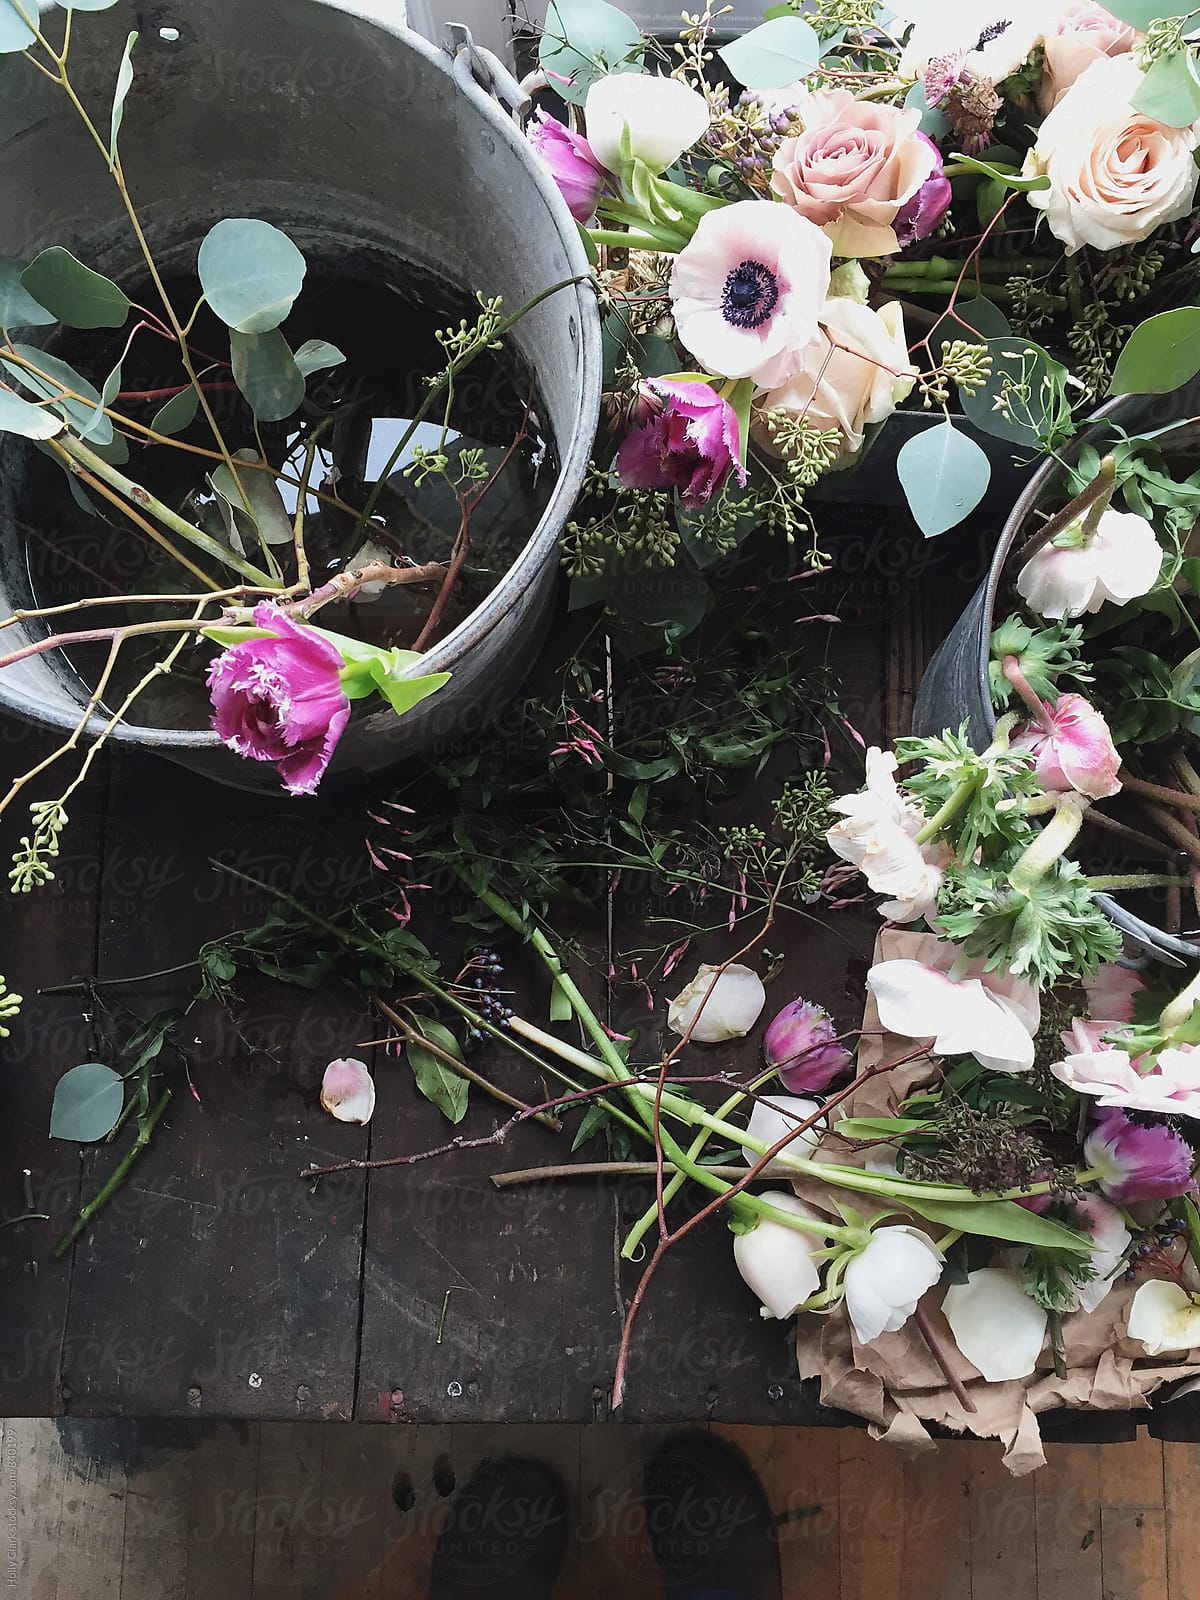 Overhead view of buckets of pretty flowers for arranging in a flower shop